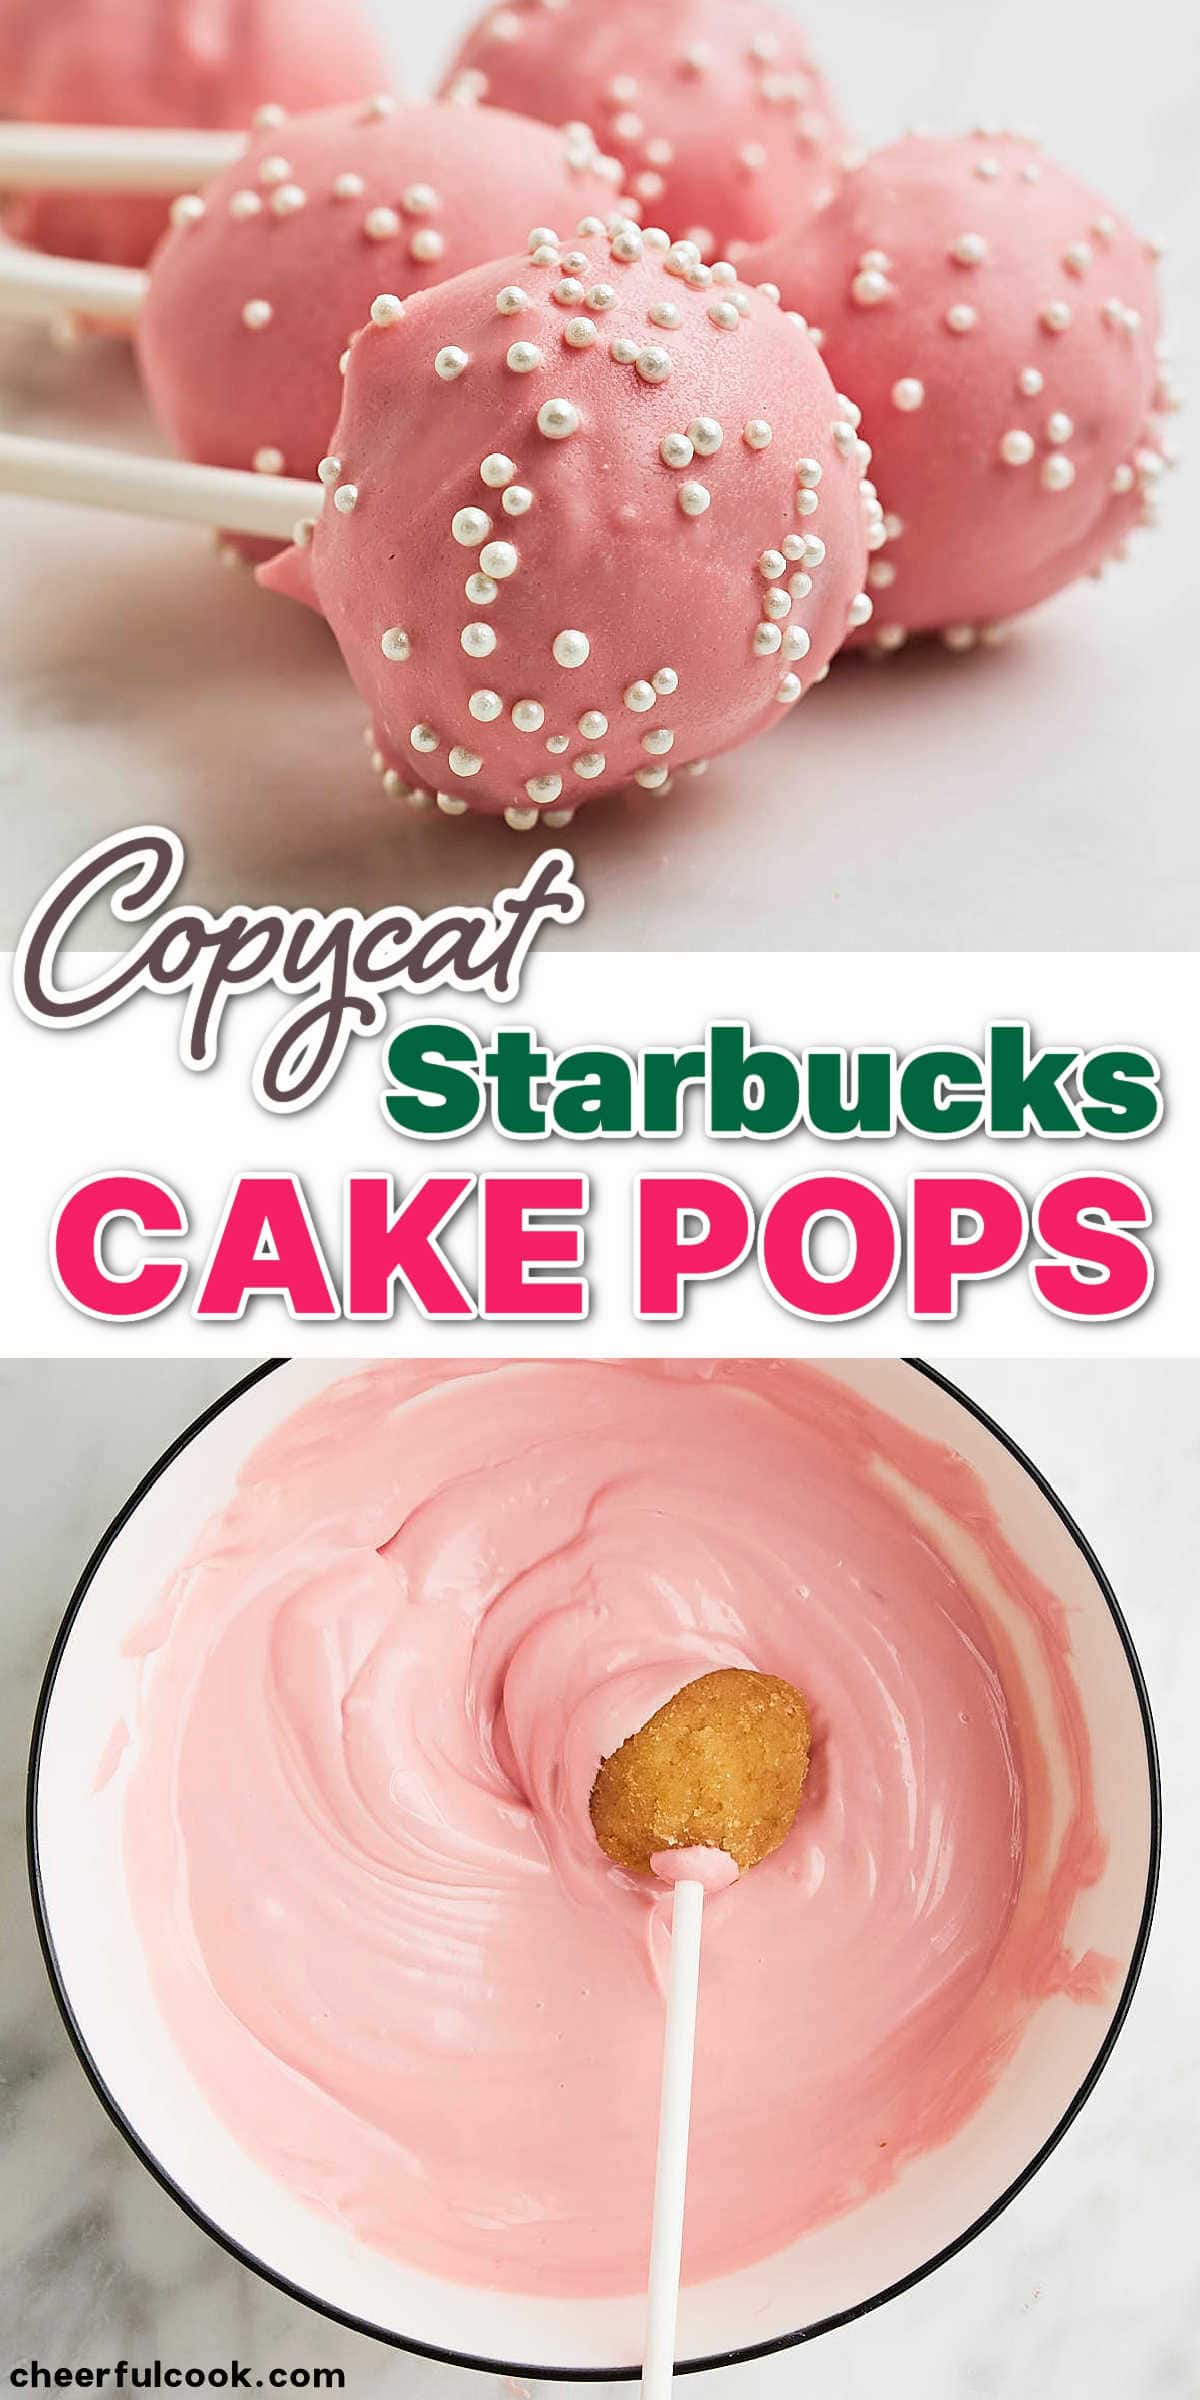 Indulge in the sweet and delicious Starbucks Cake Pops! These bite-sized treats are the perfect addition to any coffee break or afternoon snack. #cheerfulcook #cakepops #copycat #starbuckscopycatrecipe #birthdaycakepops  via @cheerfulcook